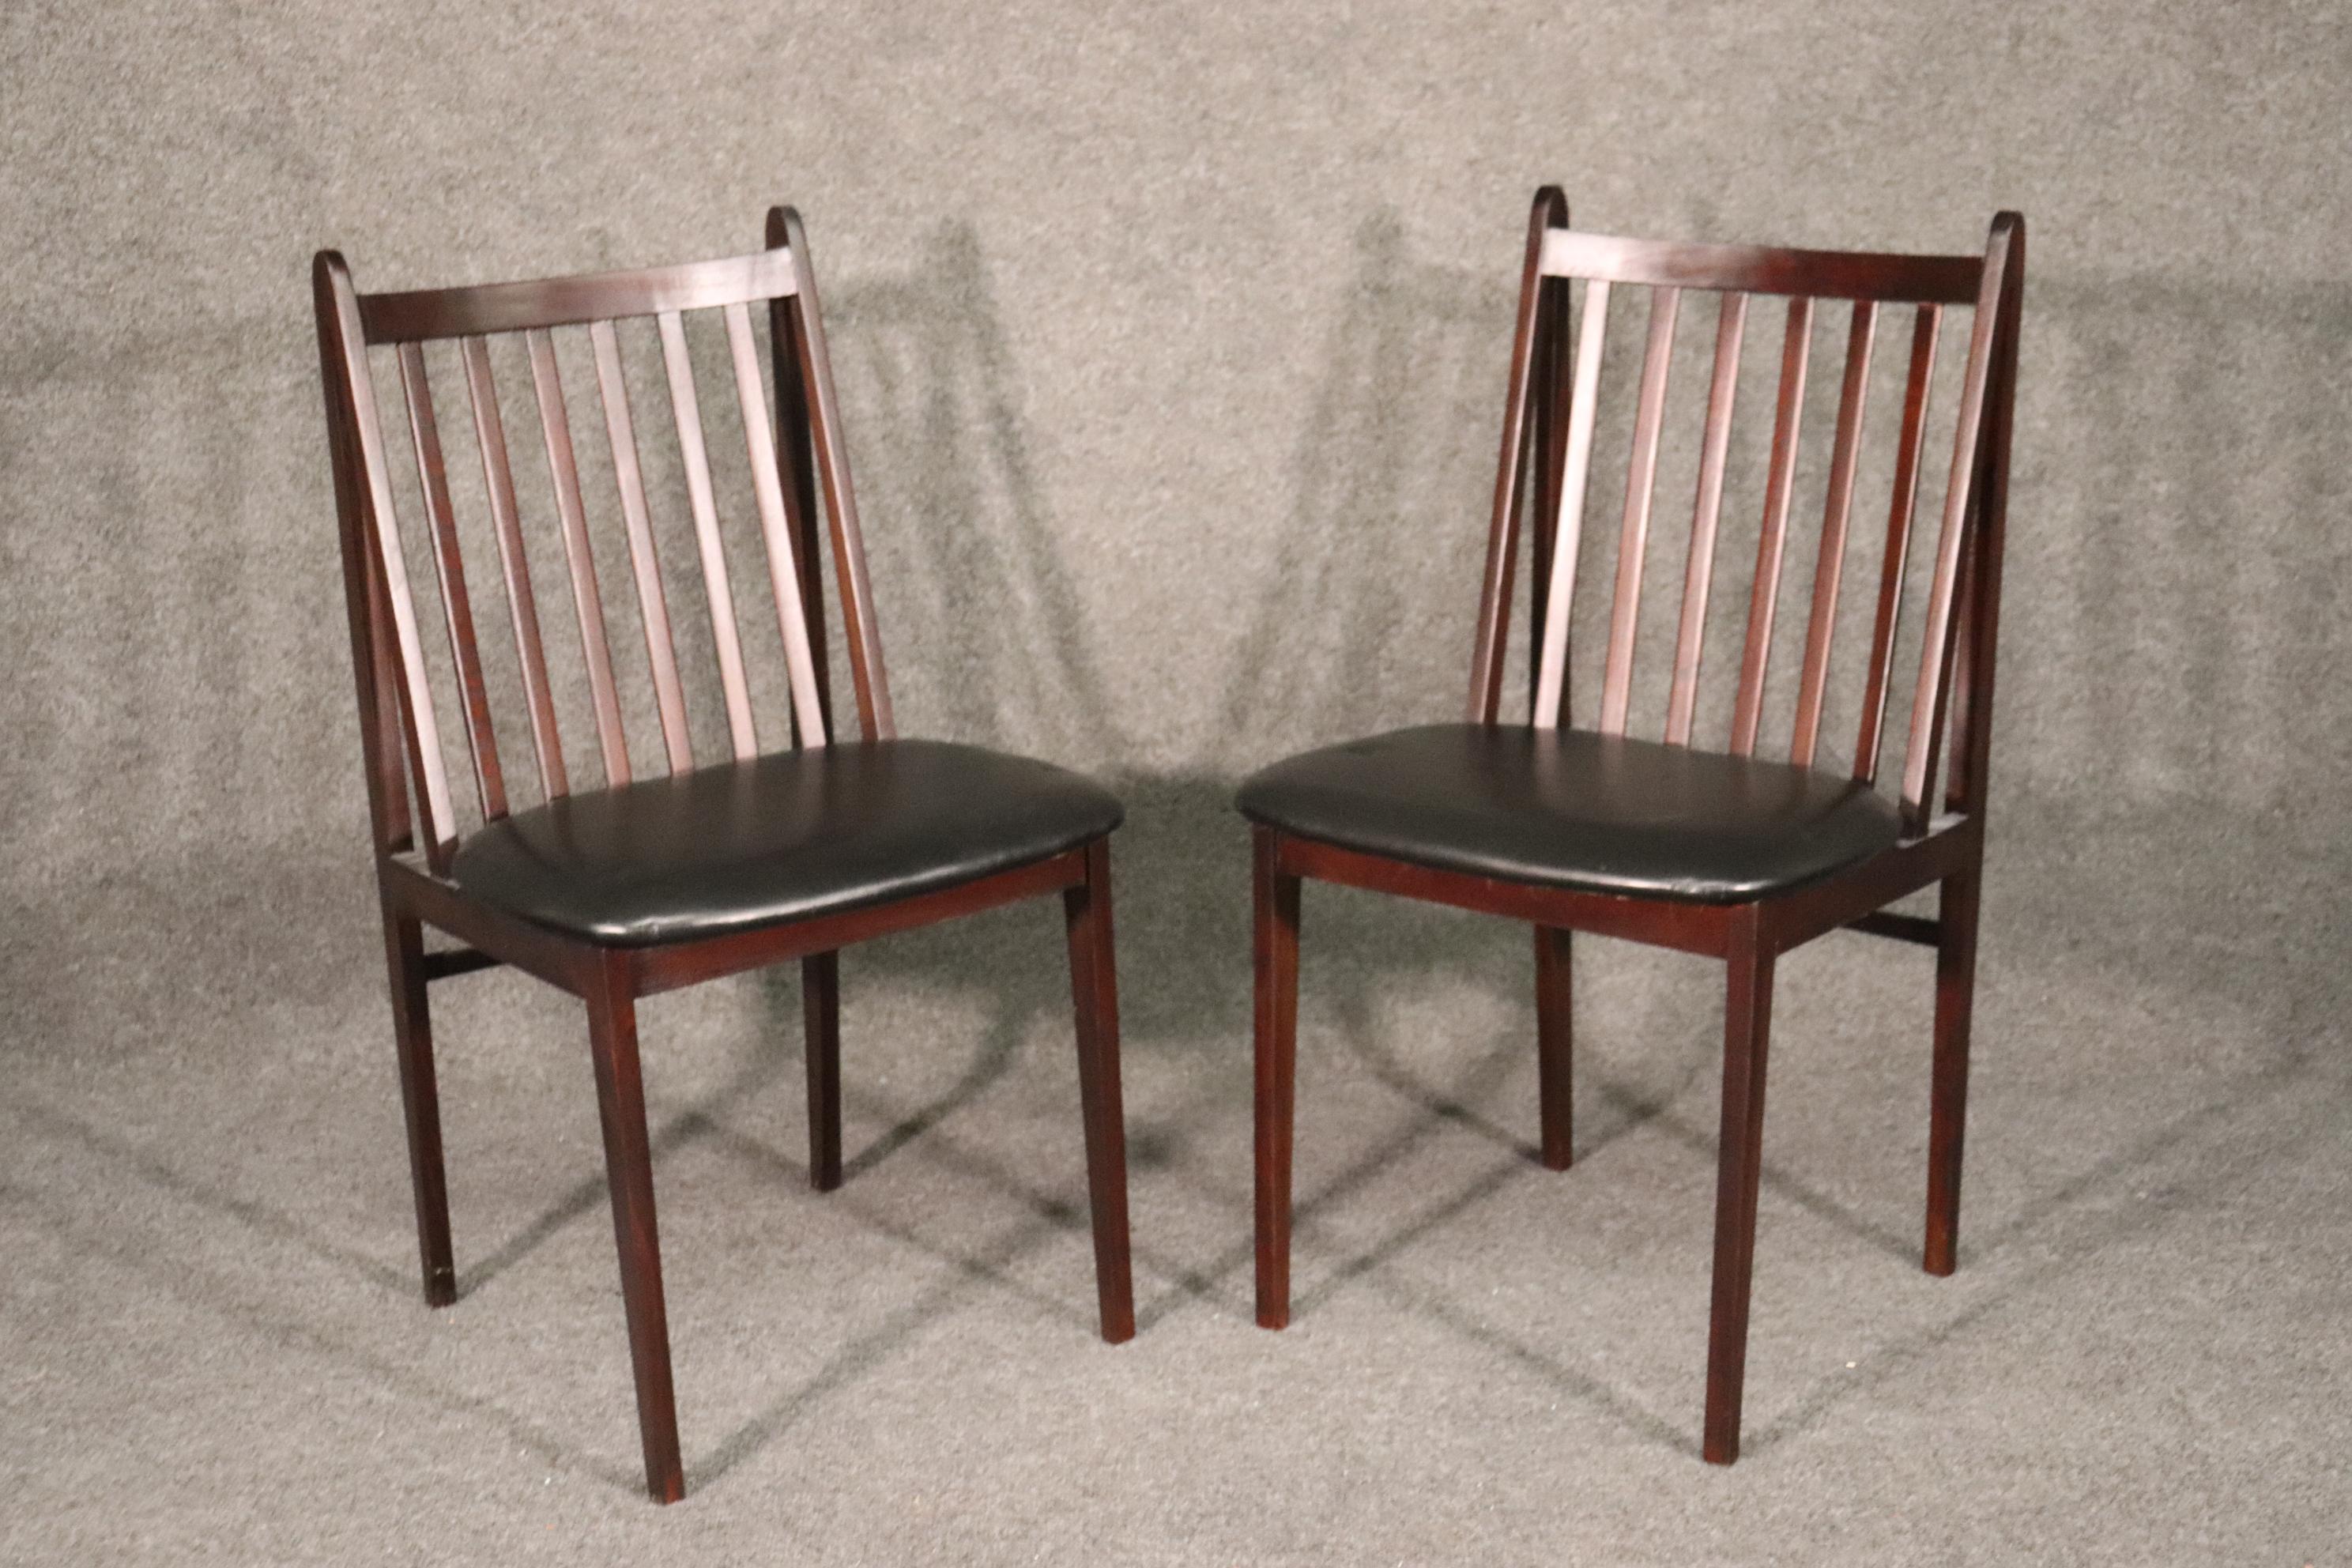 This is a nice set of 12 Mid-Century Modern dining chairs. It's not easy to find such a large set. The chairs each measure: 35 tall x 20 wide x 19 deep and the seat height is 18 inches.